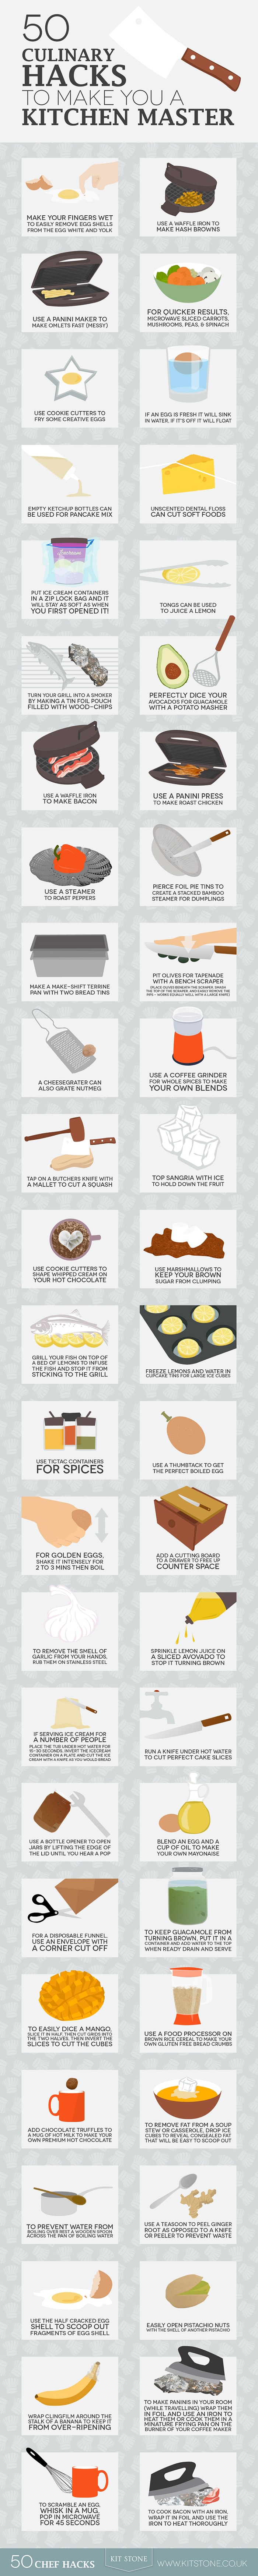 infographic kitchen tips